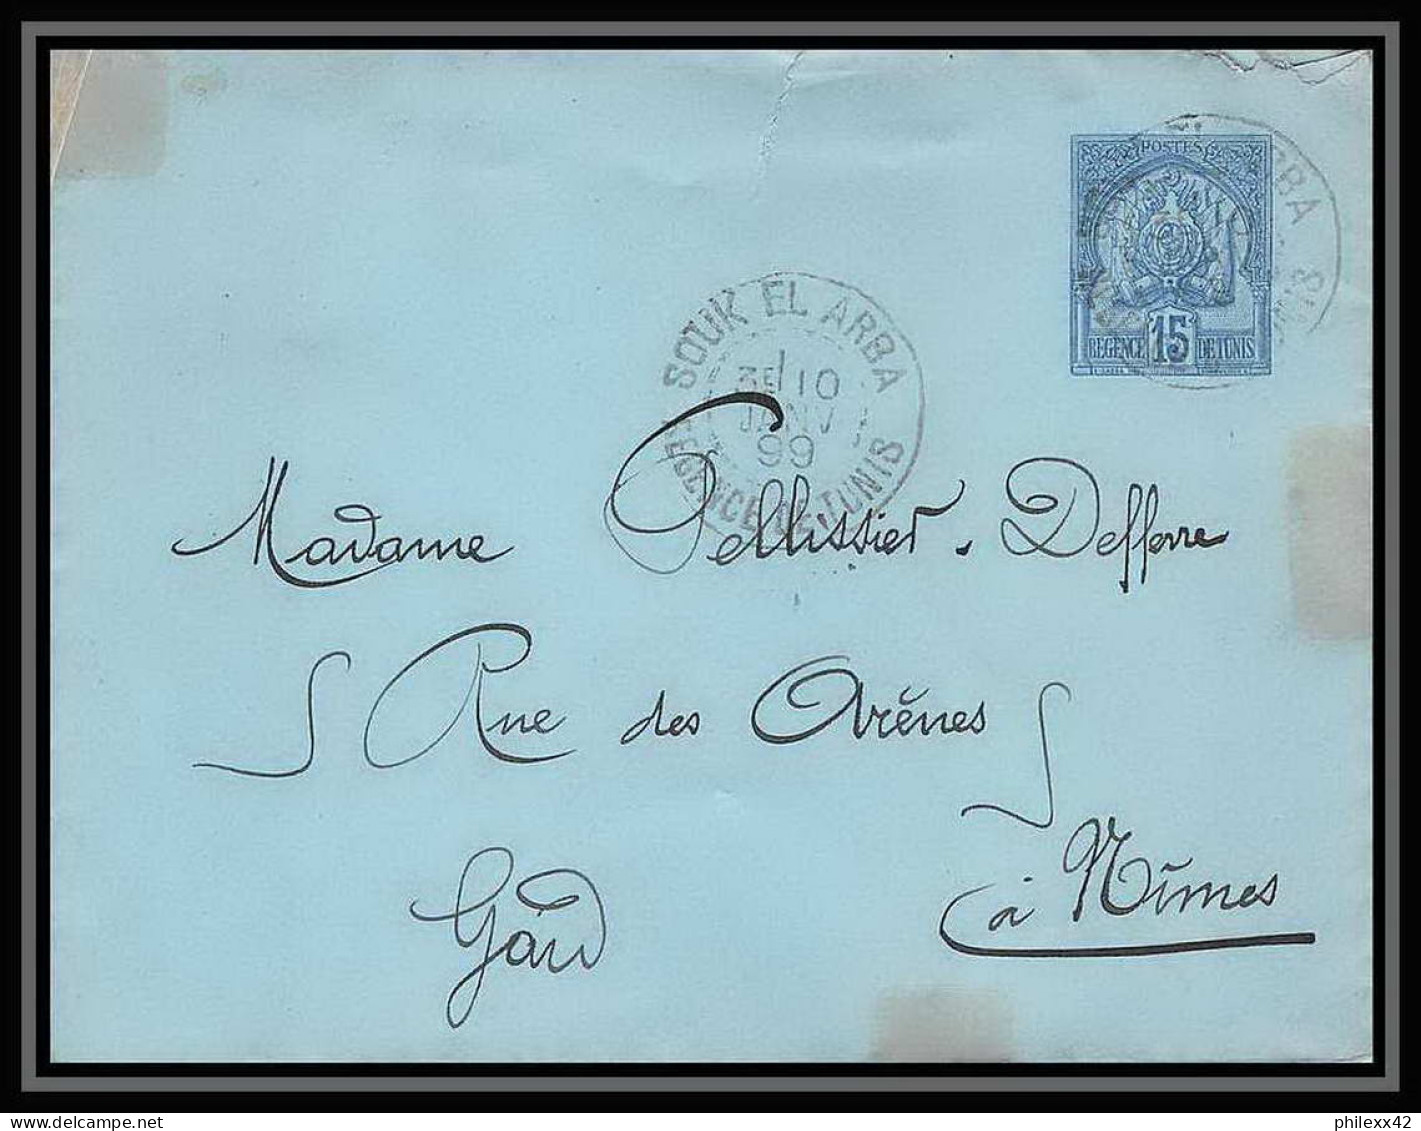 2370/ Tunisie (tunisia) Entier Stationery Enveloppe (cover) N°9 Souk El Harba Pour Nimes Gard France 1899 - Covers & Documents